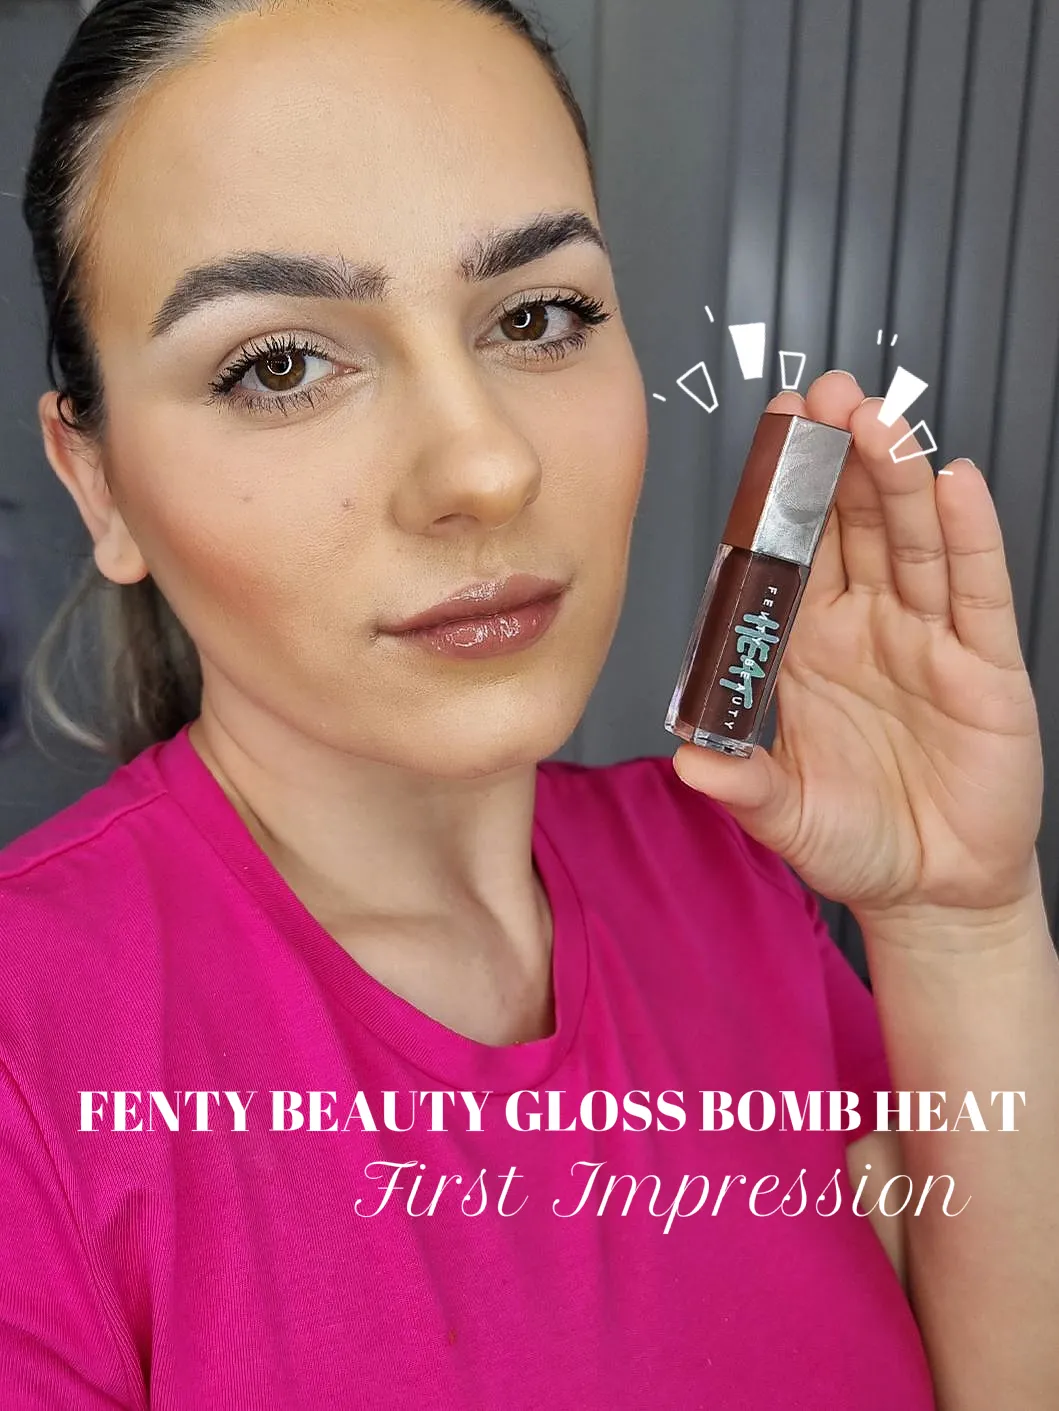 Fenty Gloss Bomb Heat Review: For Glossy, Plump Lips?